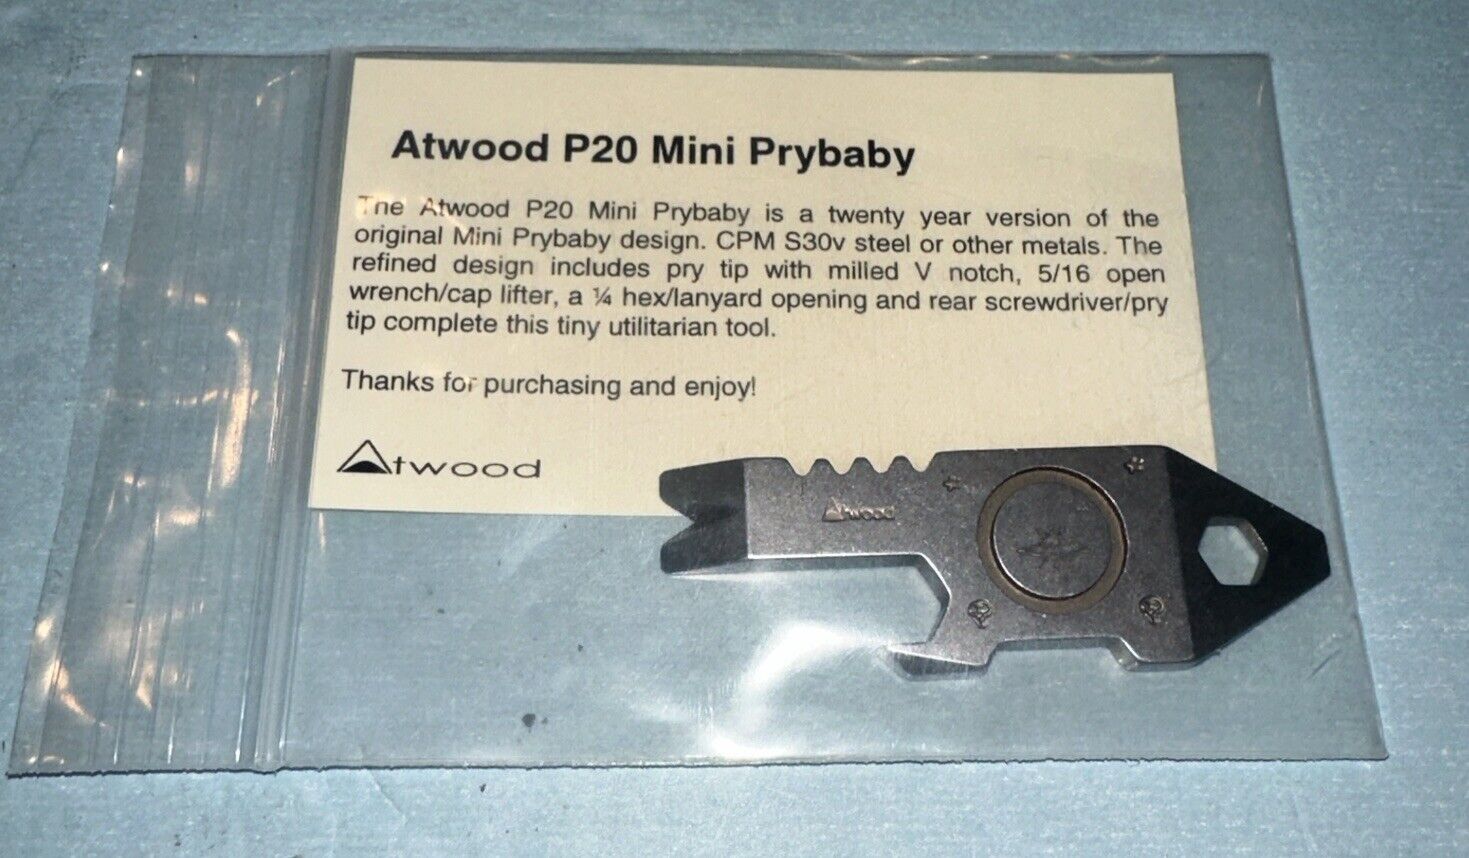 Peter Atwood Stamped P20 Steel Mini Prybaby Showcase UFO 🛸 Alien 👽 Edition